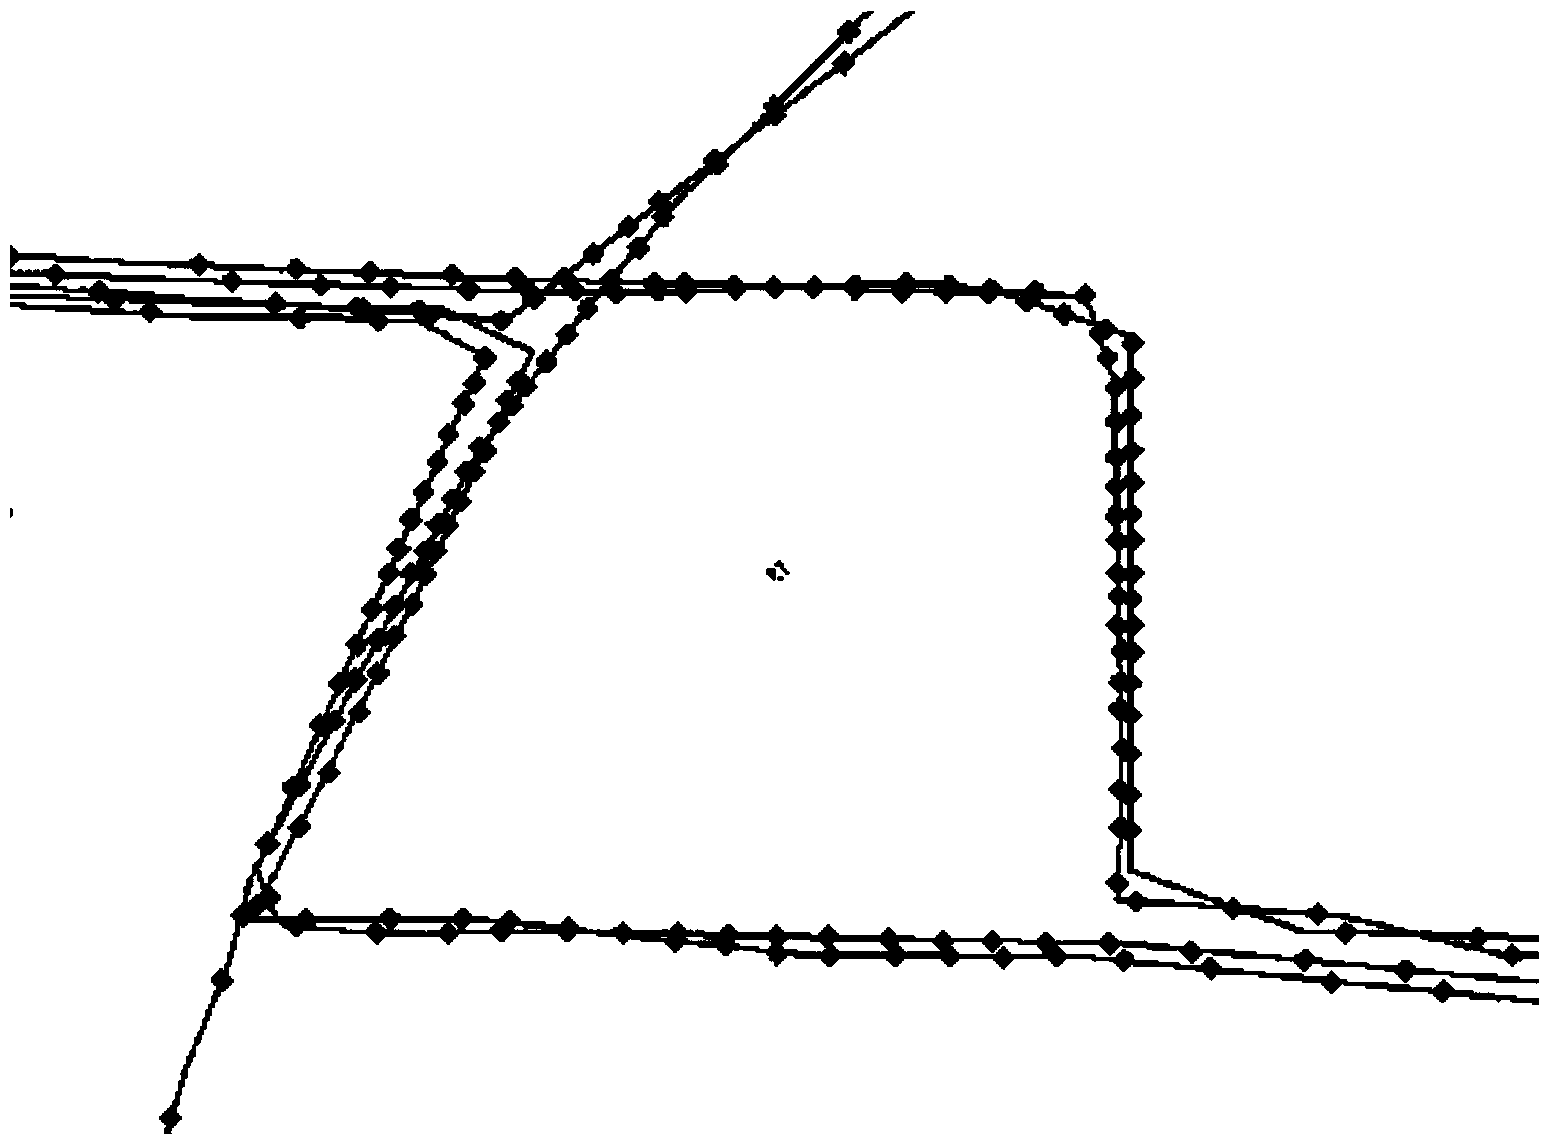 Method for generating road network vector map utilizing GPS data of floating vehicles in city